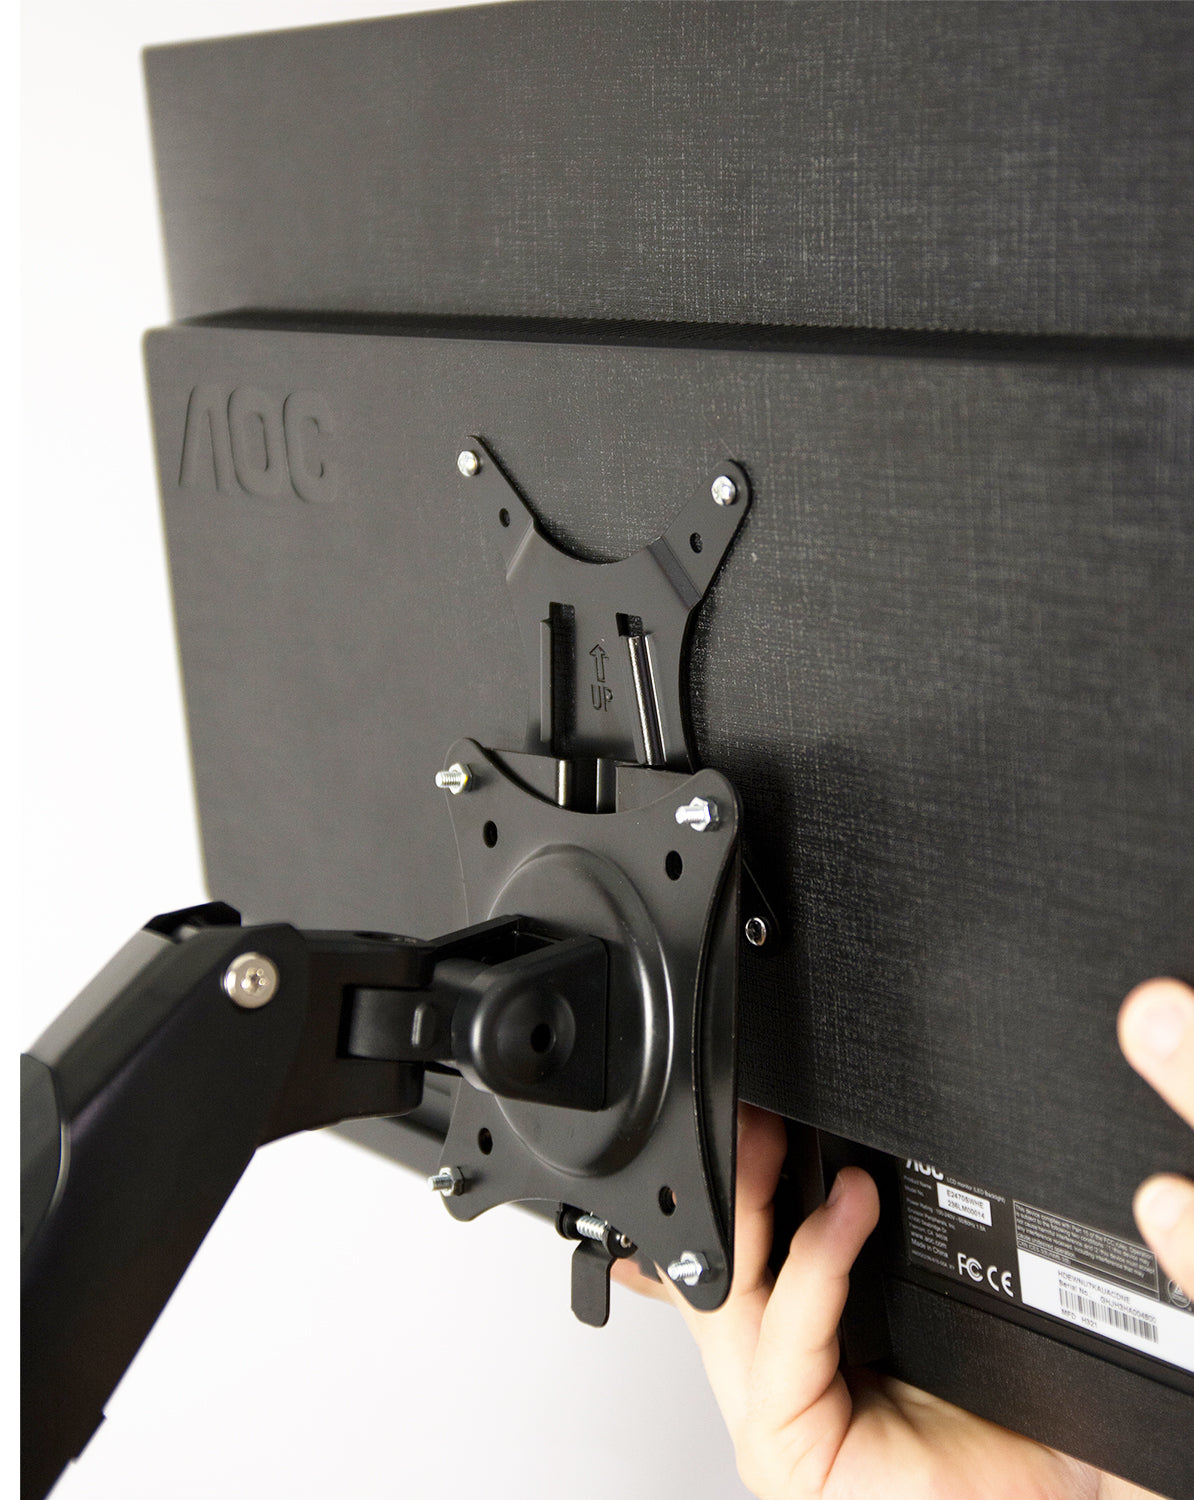 VESA Adapter for M1 and M3 iMac – VIVO - desk solutions, screen mounting,  and more